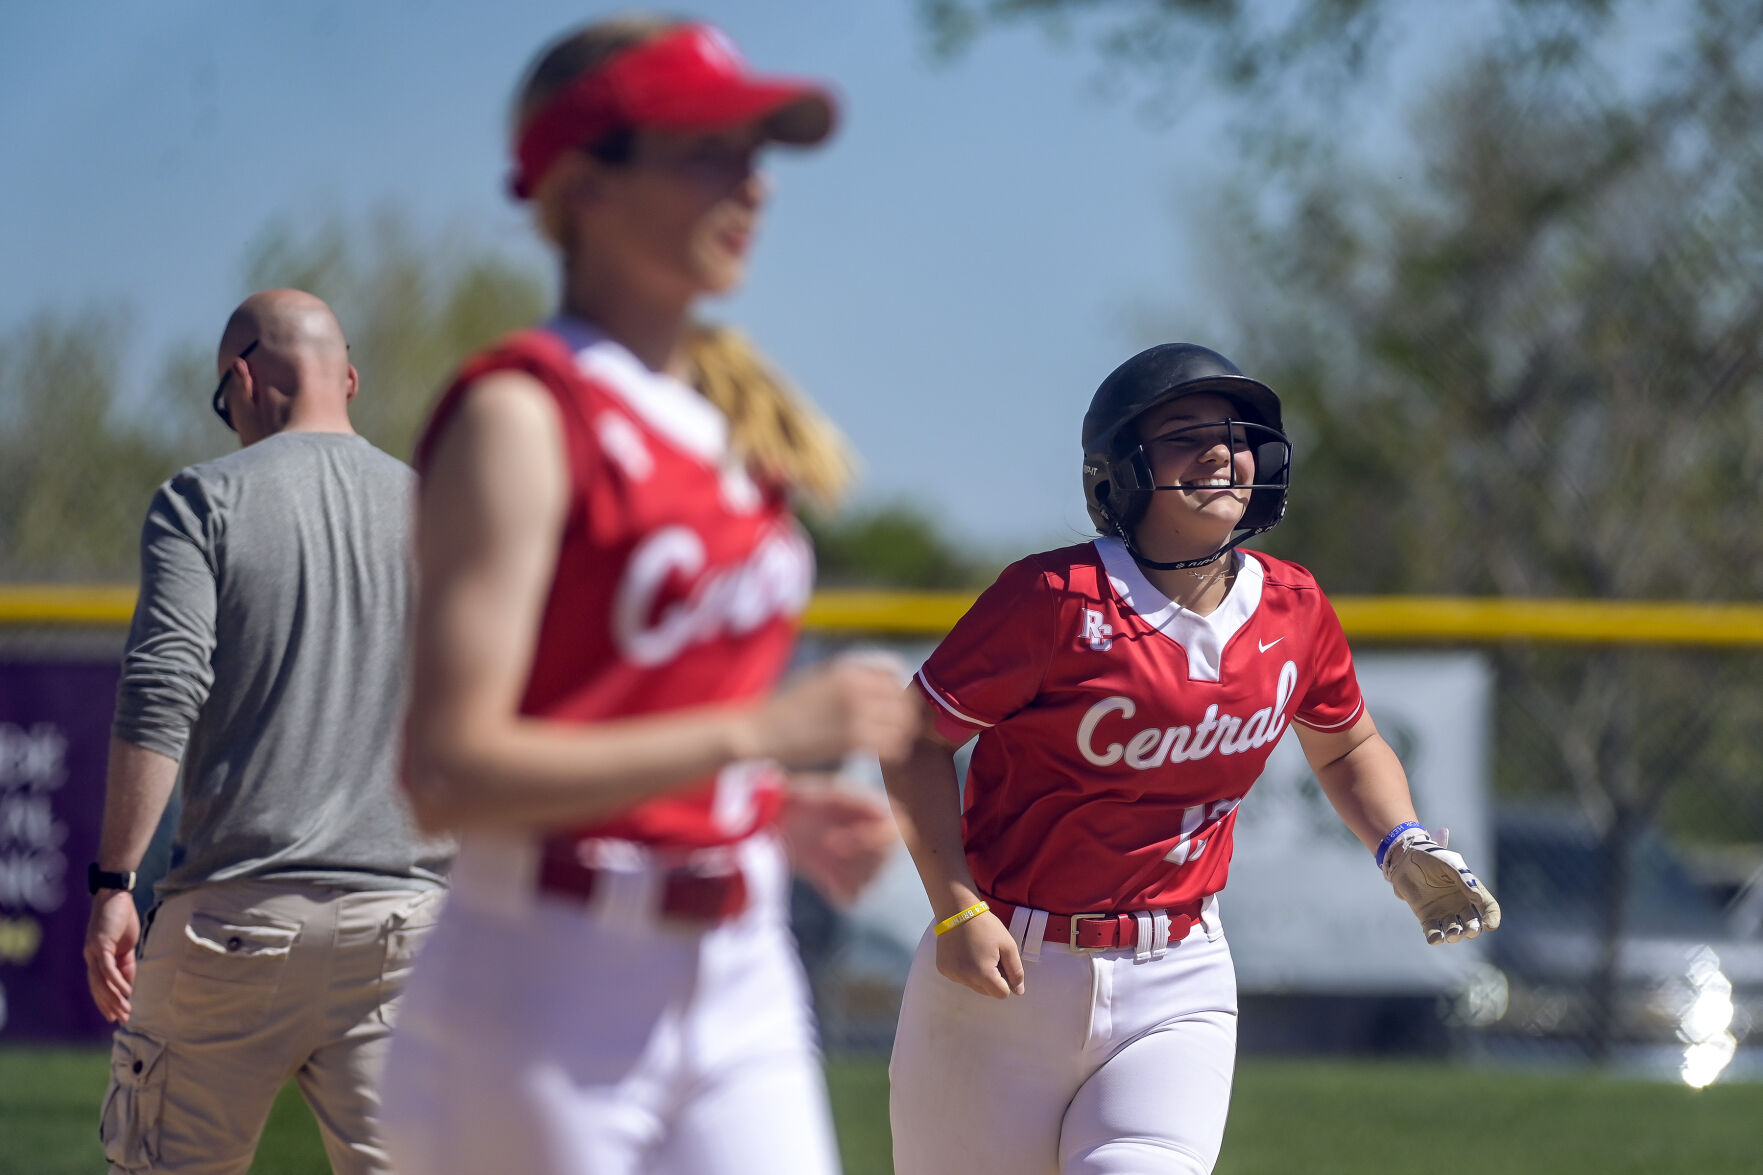 Sioux Falls Softball Teams Dominate over Weekend Games in Rapid City